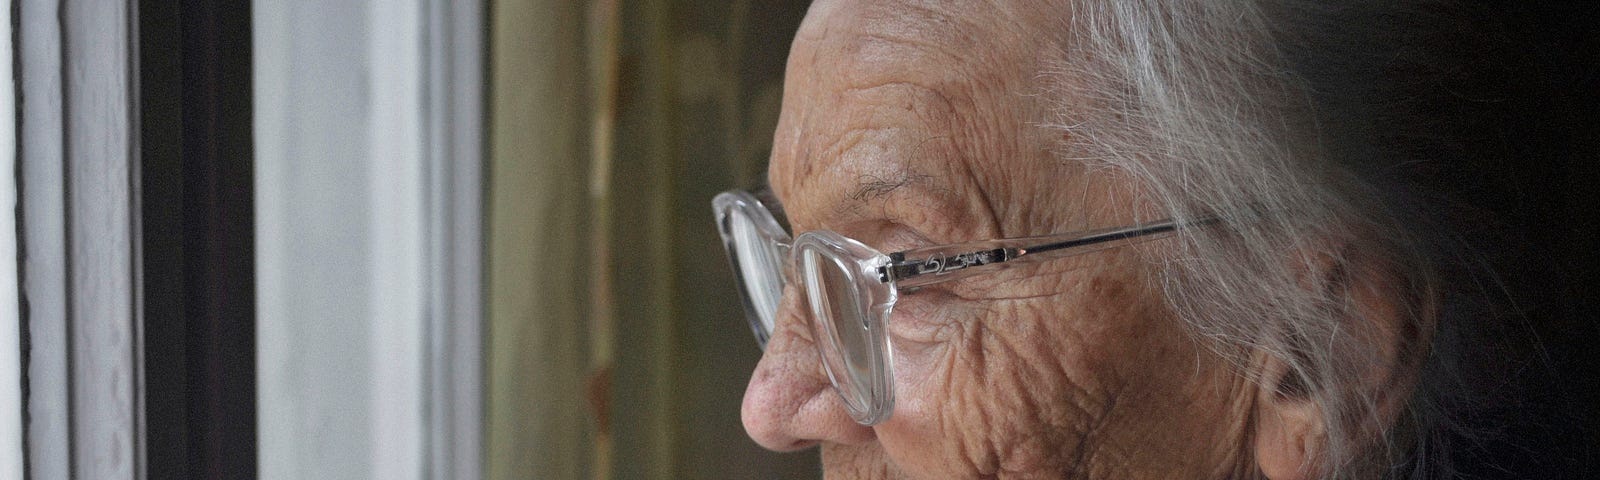 A close-up of an old lady with gray hair and wearing glasses.